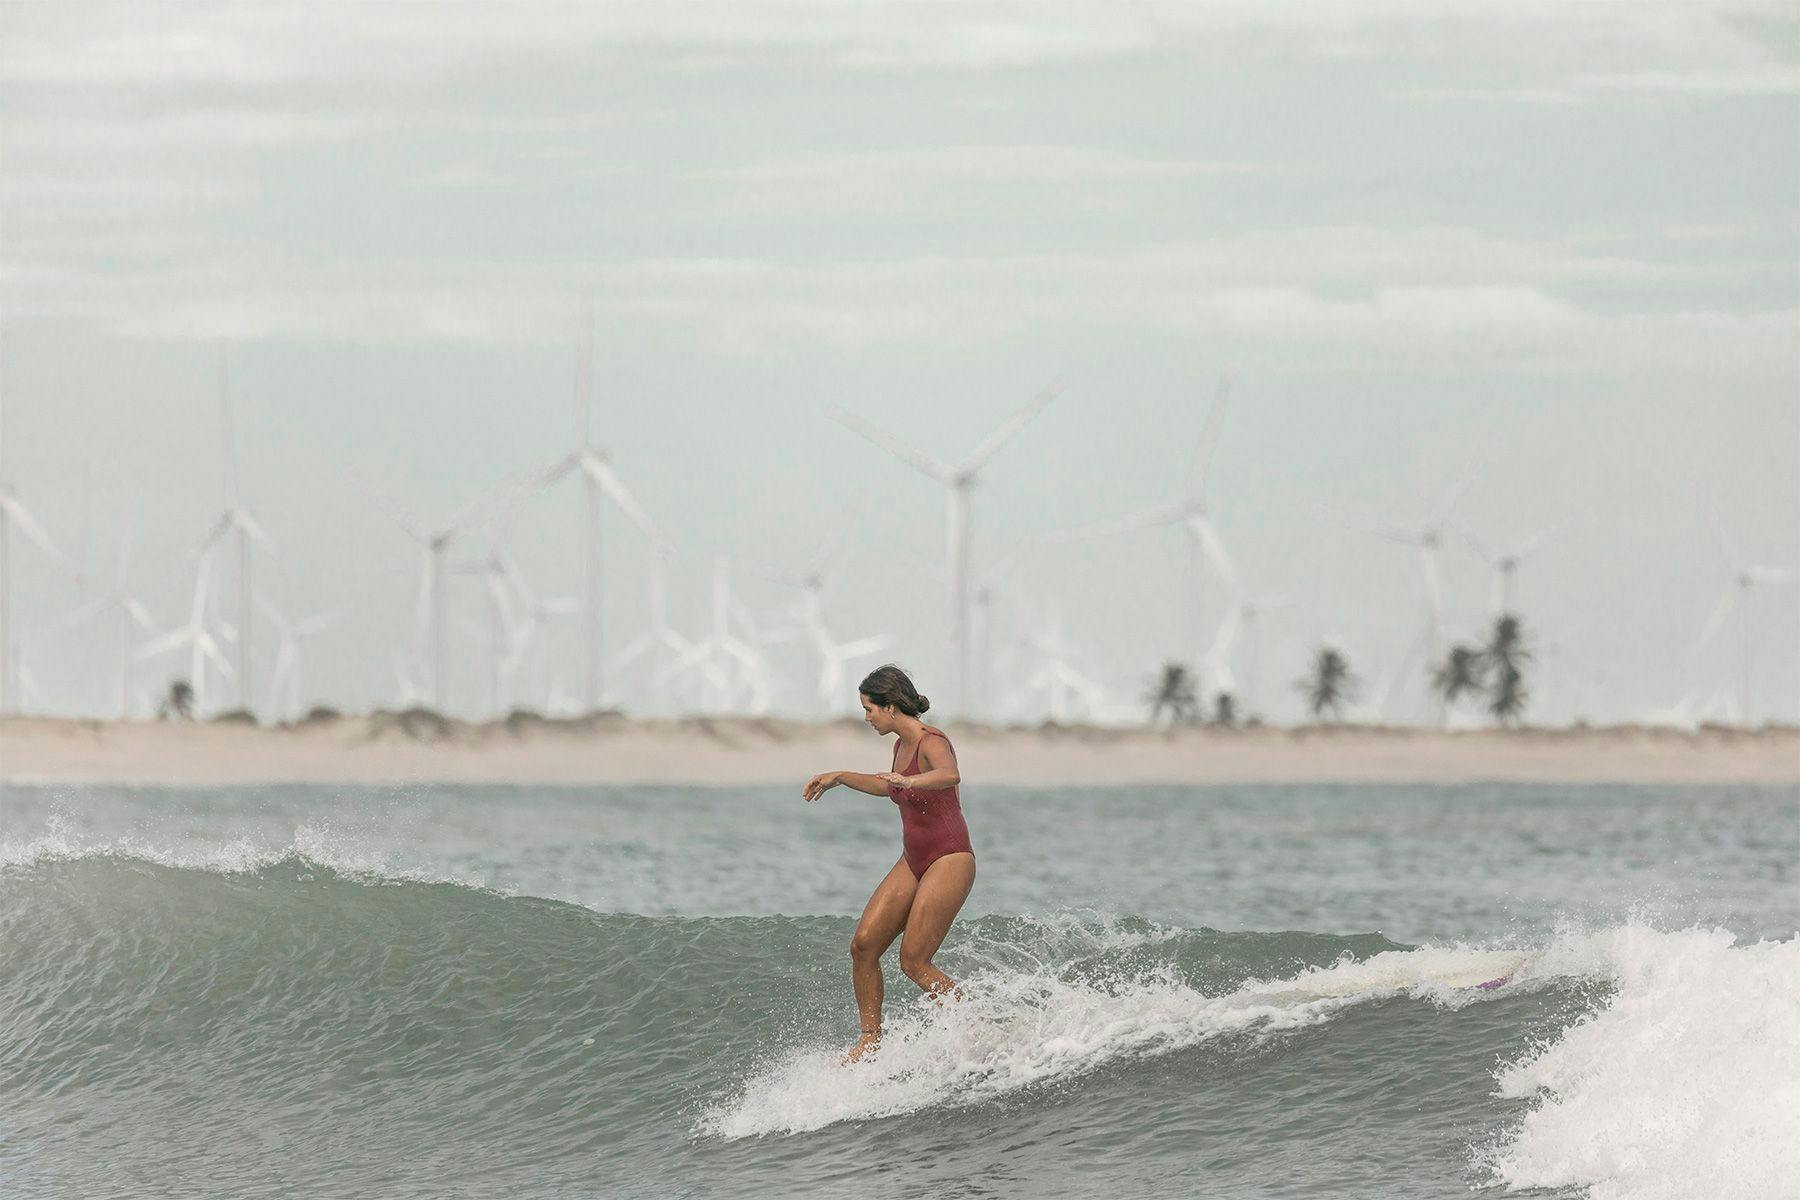 female longboard surfer noseriding a wave in brazil with a wind farm in the background